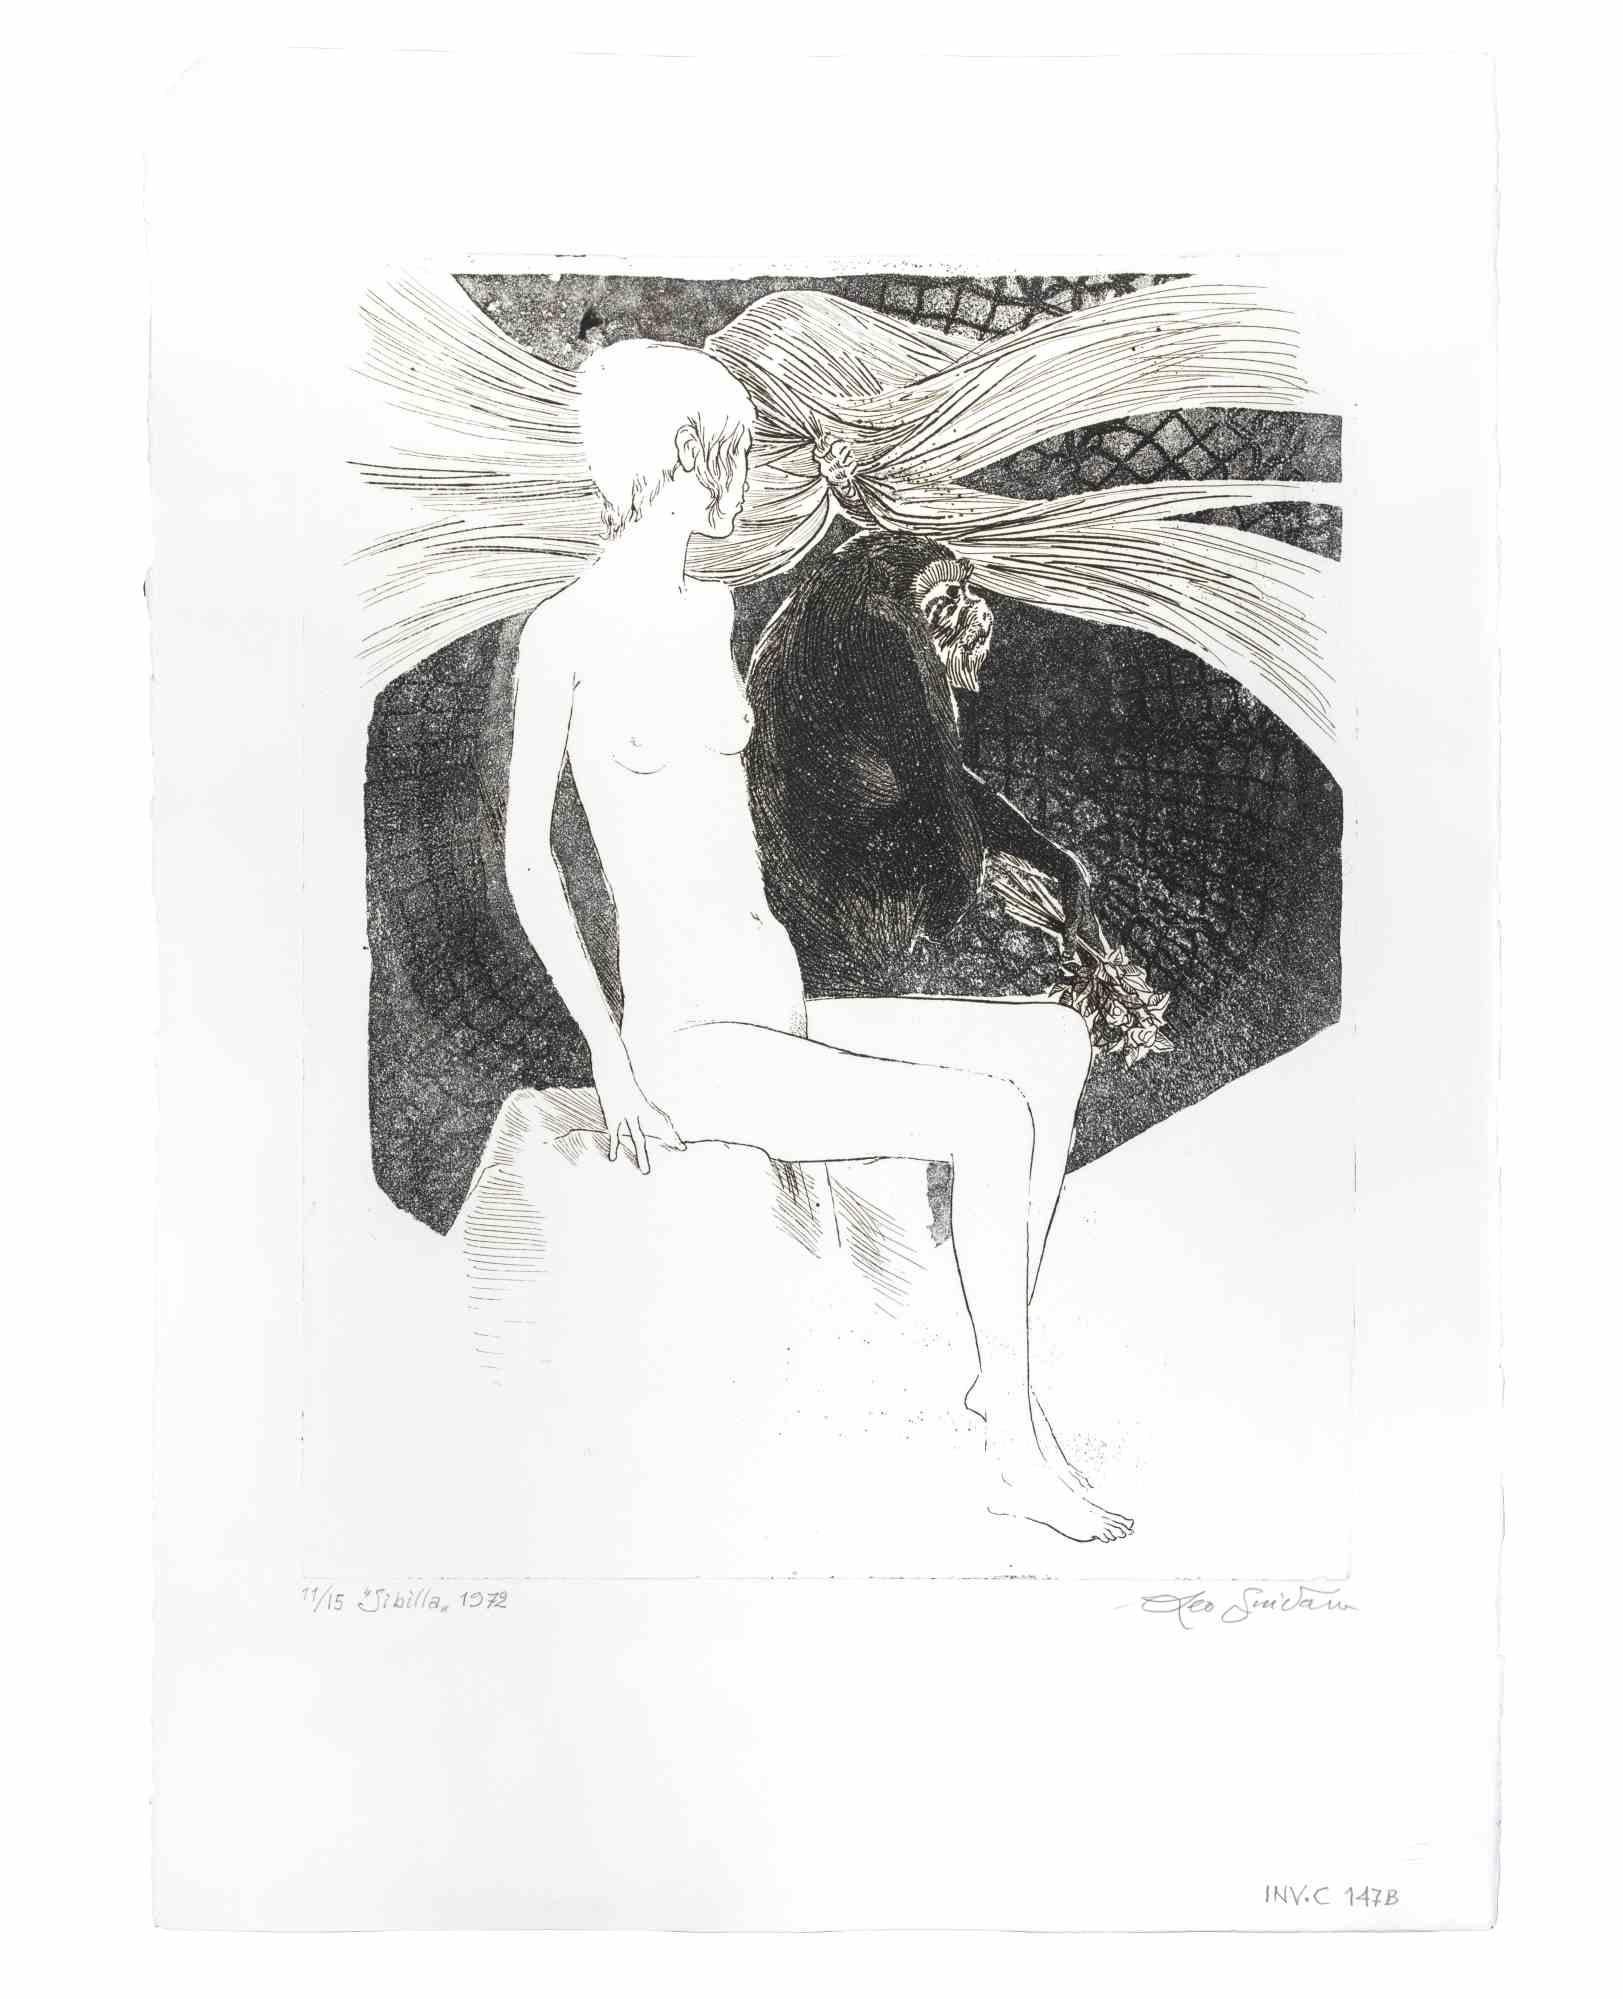 Sibilla (Sibyl) is an artwork realized by the italian Contemporary artist  Leo Guida (1992 - 2017) in 1975s.

Original black and white etching on paper.

Hand Signed on the lower right margin.Titled, dated and numbered, ex. 11/15, on the lower left